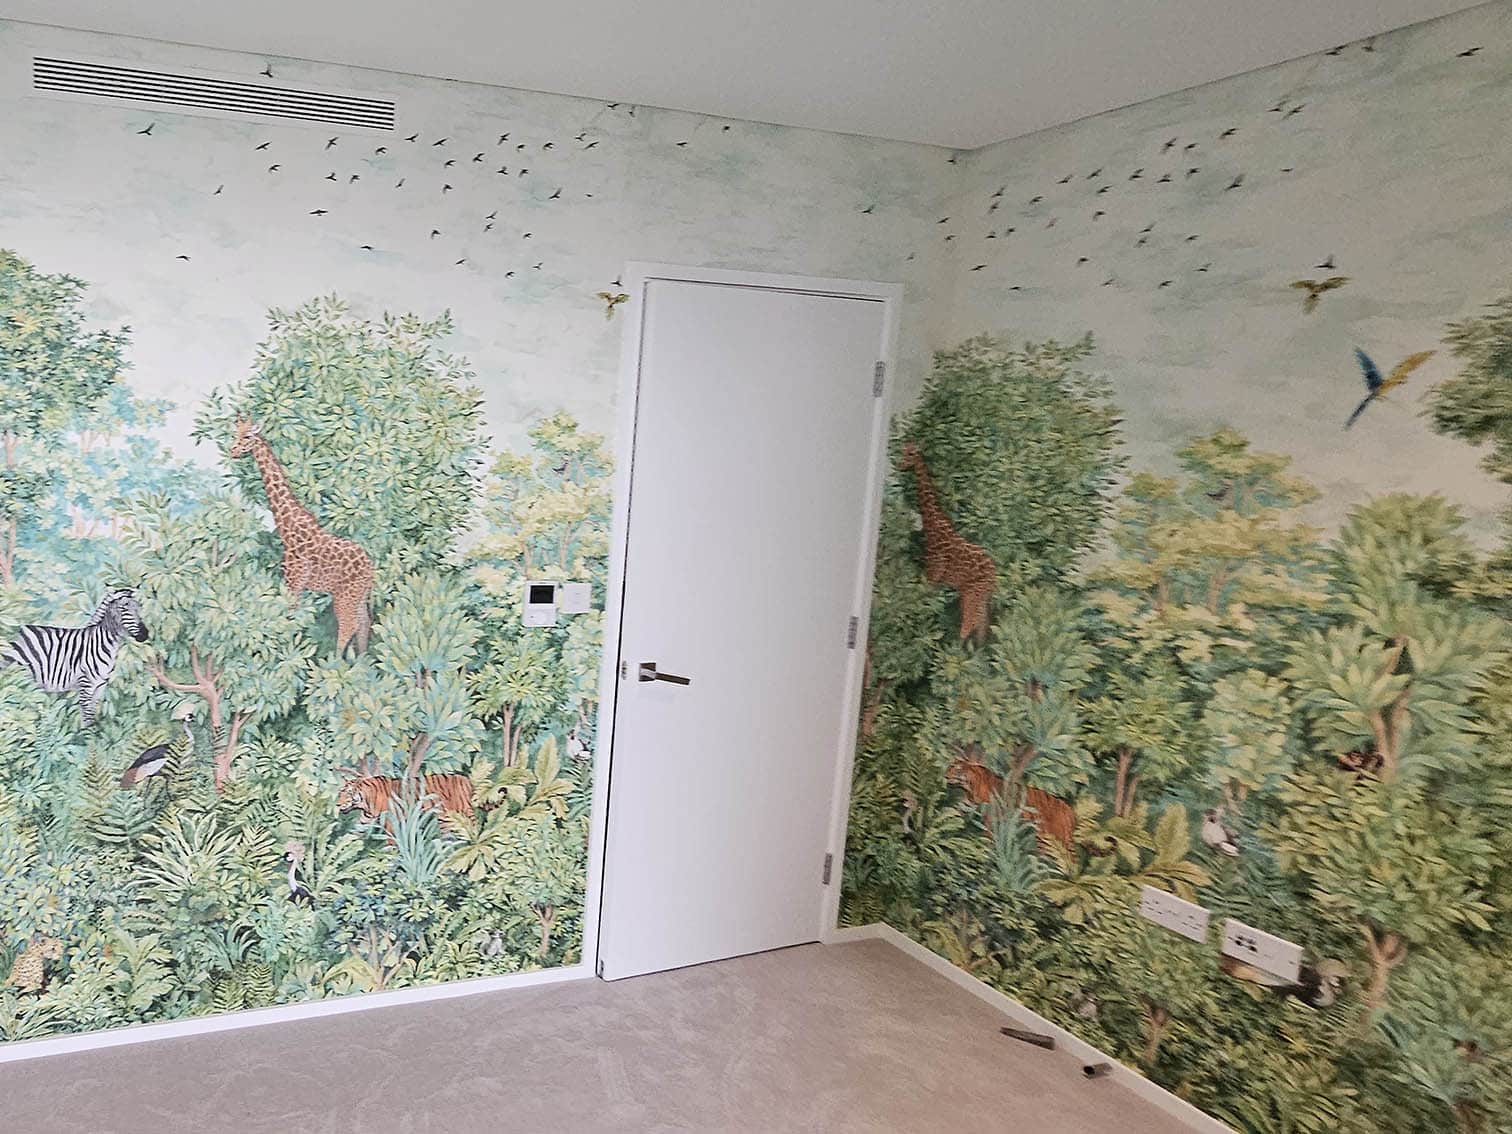 Animals and trees wallpaper installation.